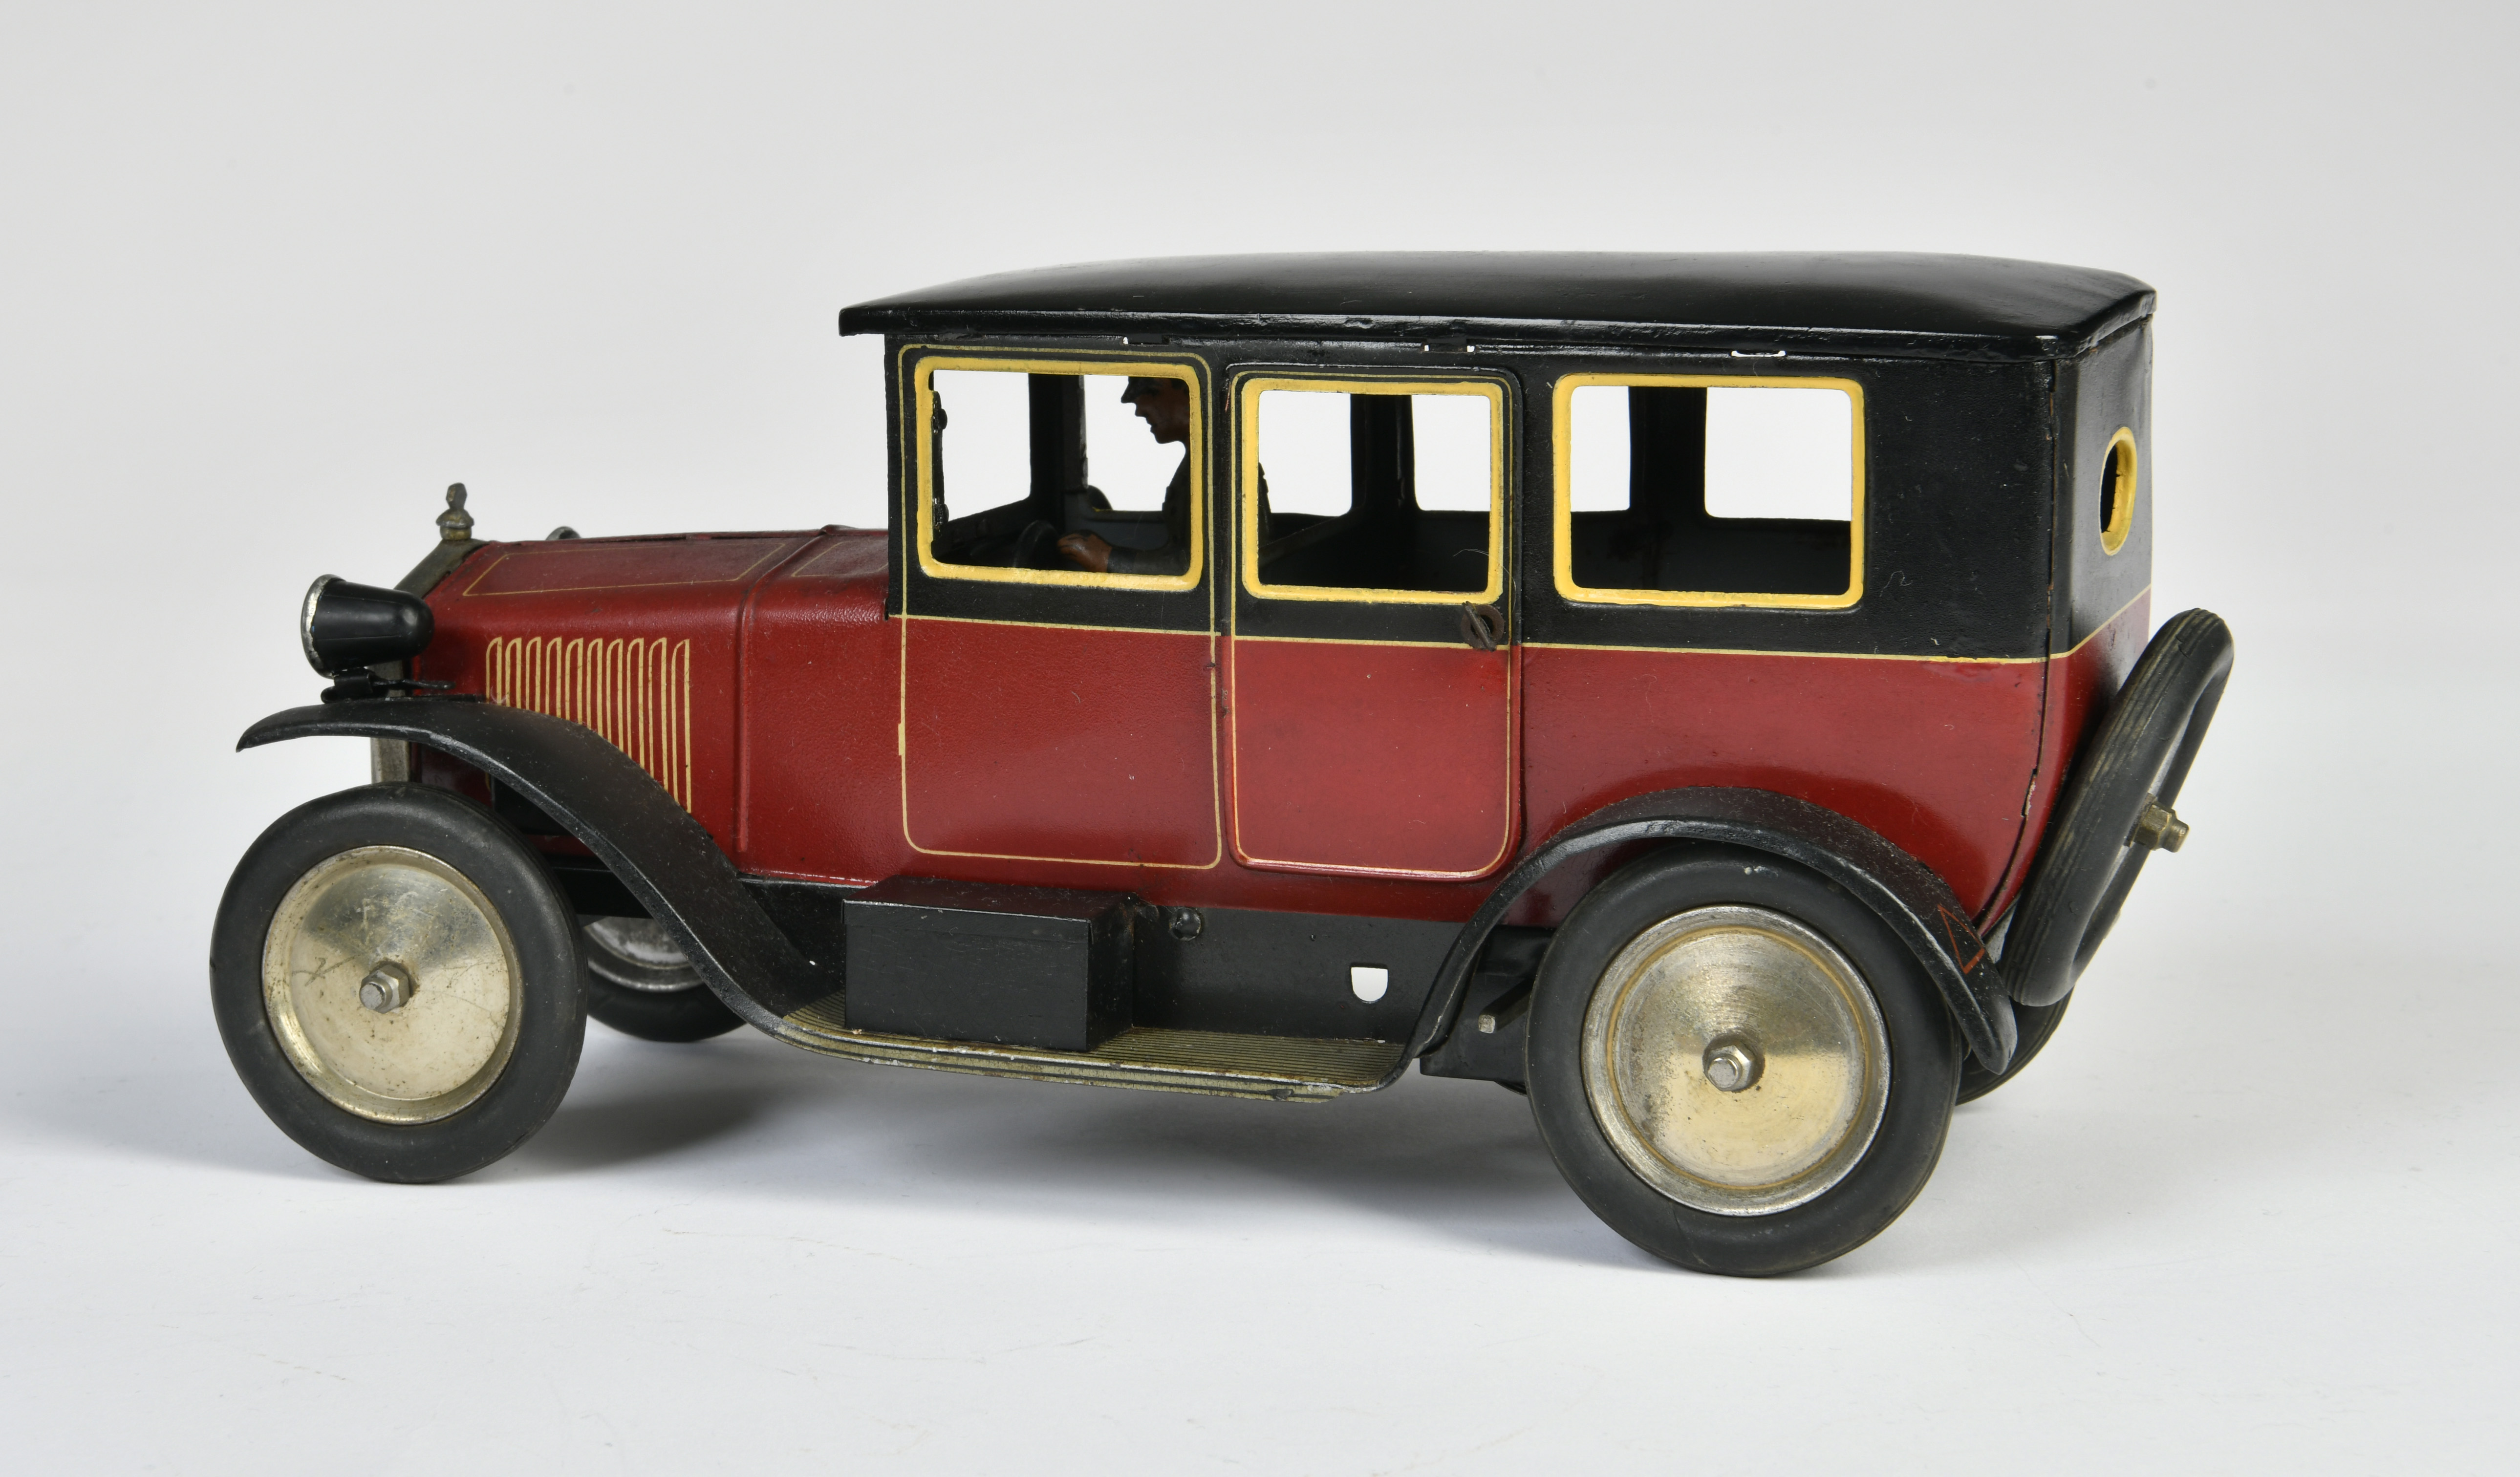 Bing, sedan car, Germany pw, 29 cm, tin, cw ok, roof repainted, otherwise very good condition - Image 2 of 3